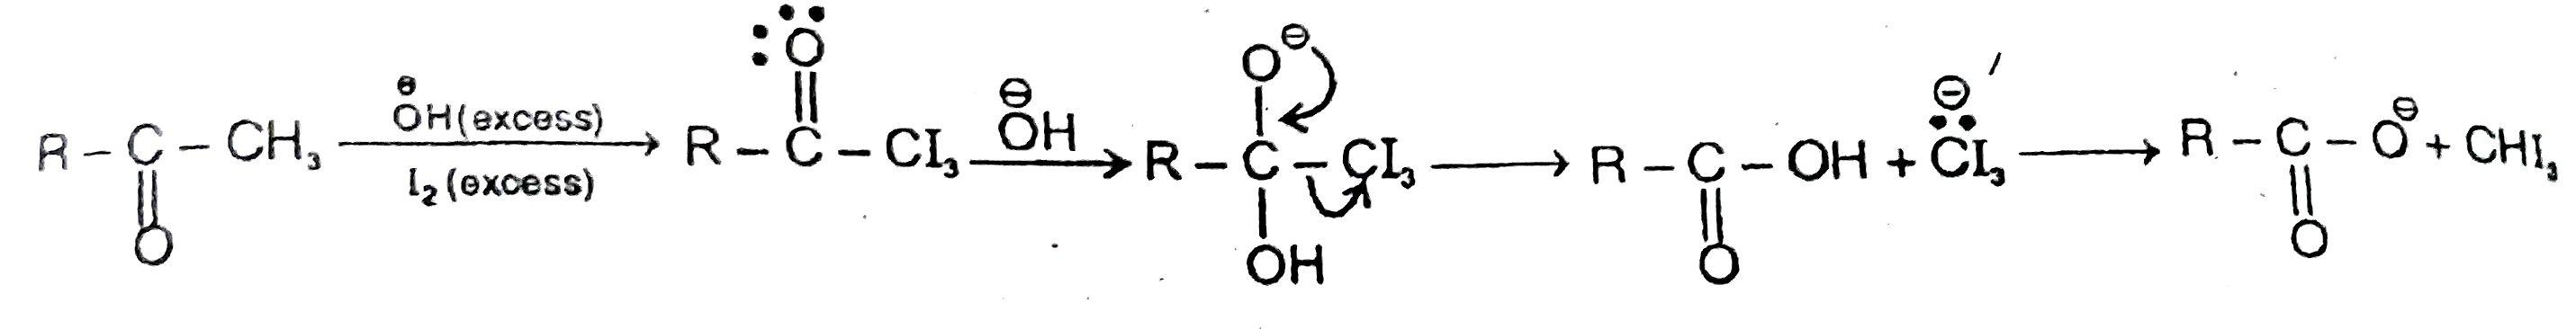 In the presence of excess base and excess halogen a methylketone is converted first into a trihalo substituted ketone and then into a carboxylic acid.After the trihalo substituted ketone is formed hydroxide ion attacks the carboxyl carbon because the trihalo methyl ion is the group more easily expelled from the tetrahedral intermediate.The conversion of a methyl ketone to a carboxylic acid is called a haloform reaction because one of the product is haloform (CHCl3) or CHI3 or CHBr3.      Which of the following compound show haloform reaction and racemisation in OD^(-) //D2O